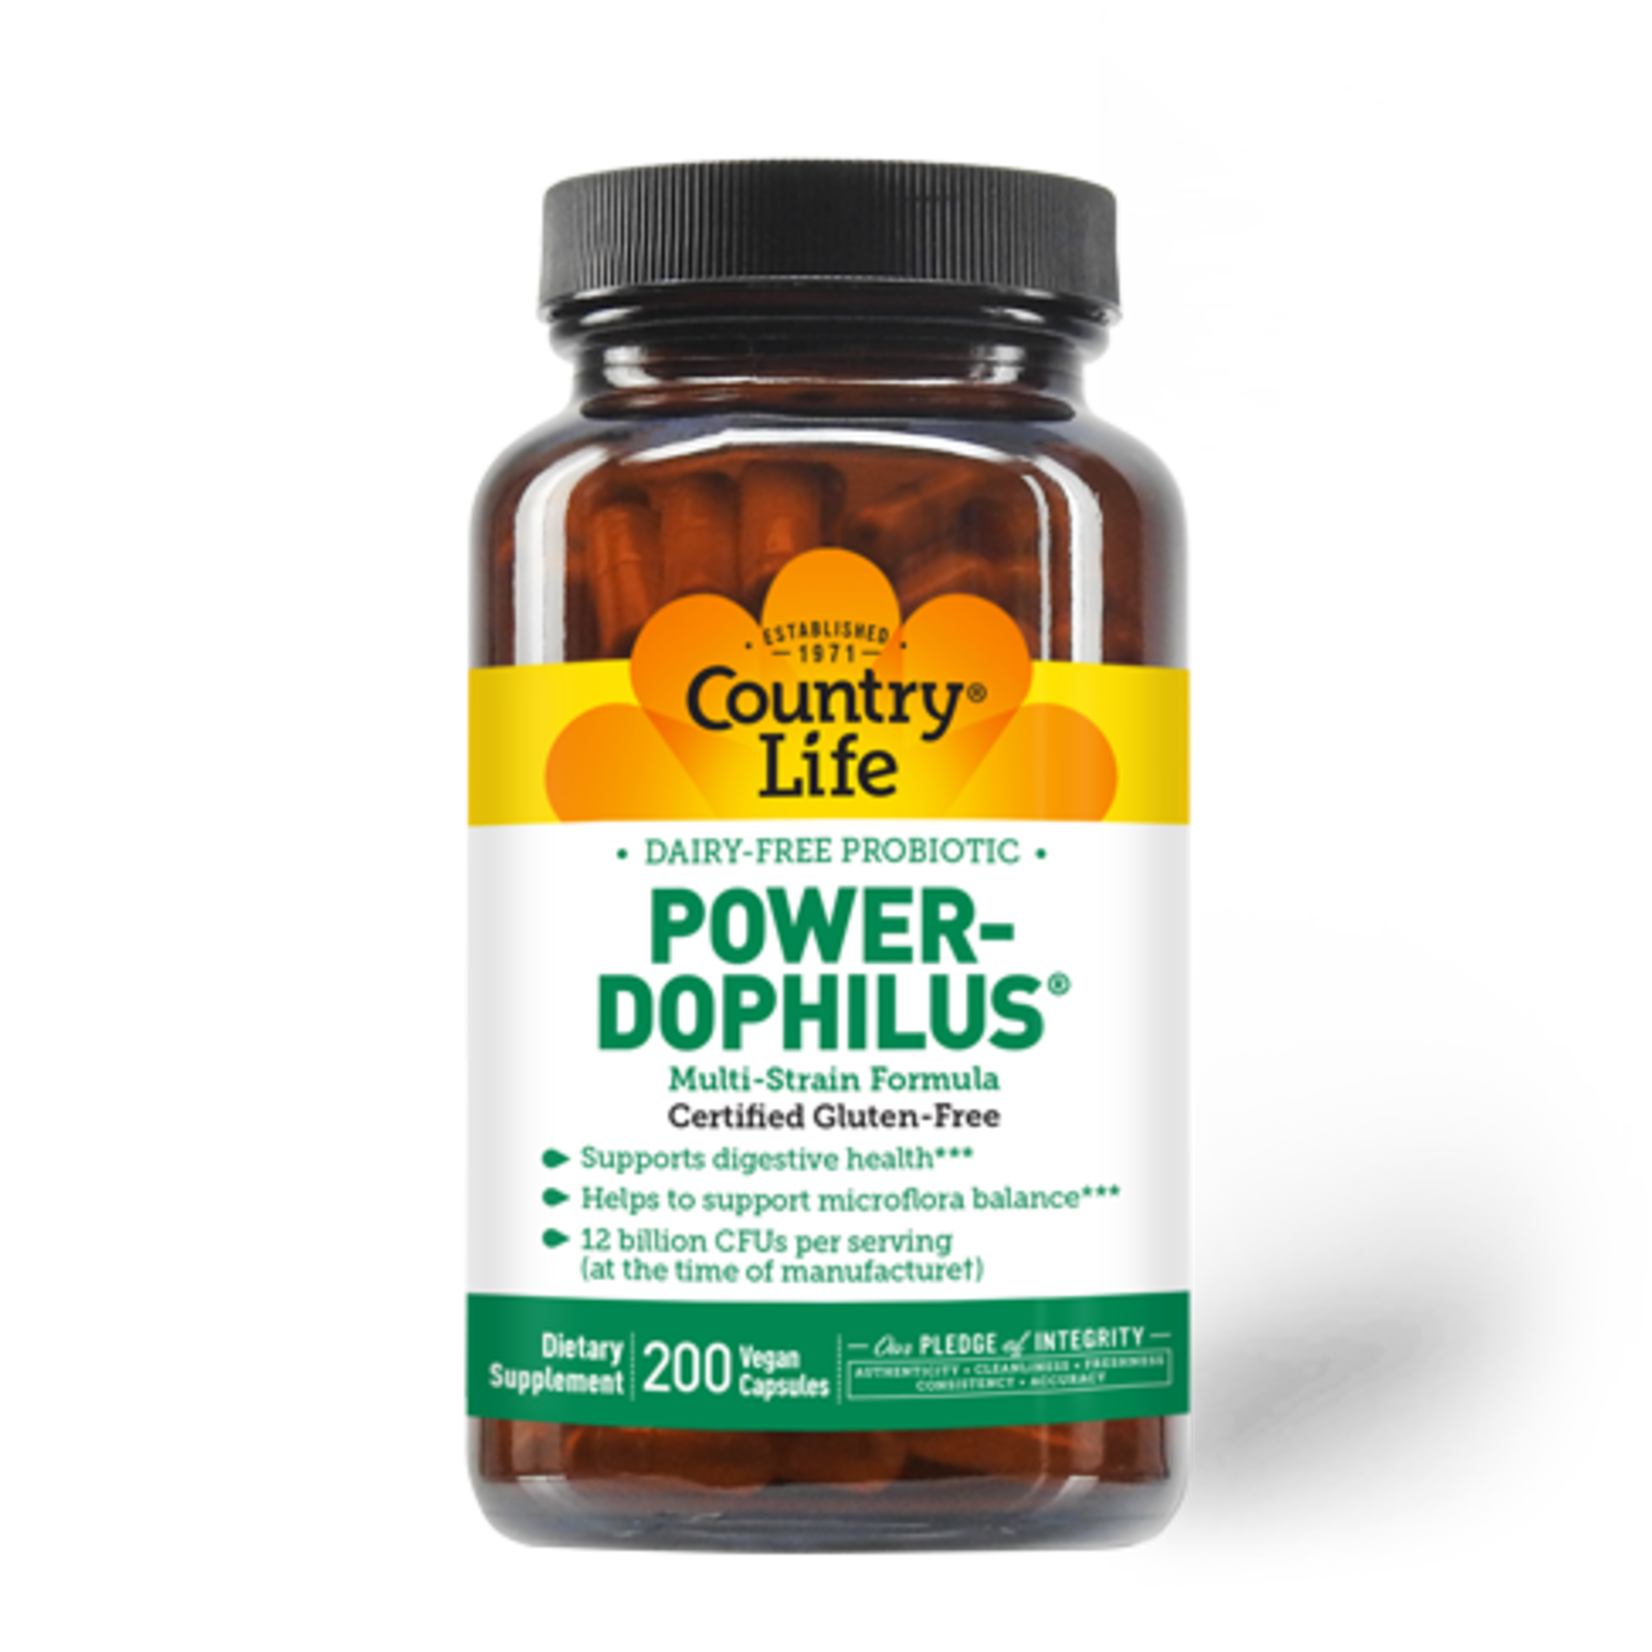 Country Life Country Life - Power Dophilus - 200 Veg Capsules